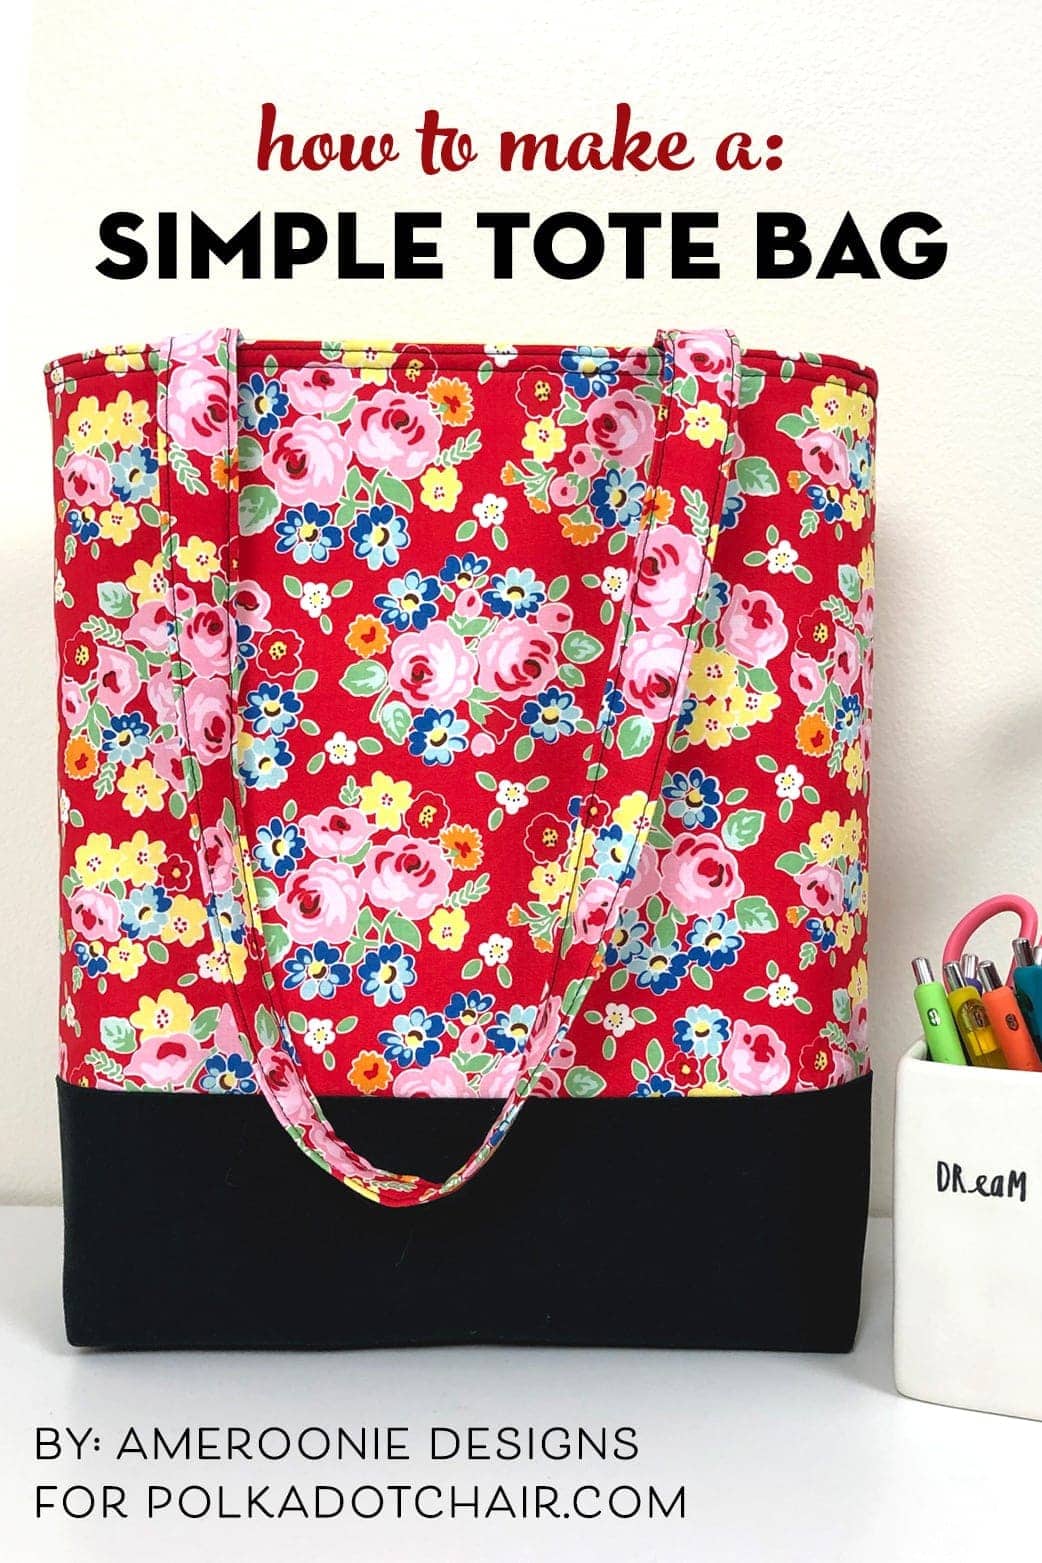 Learn How to Make a Bag; A Simple Tote Bag Pattern